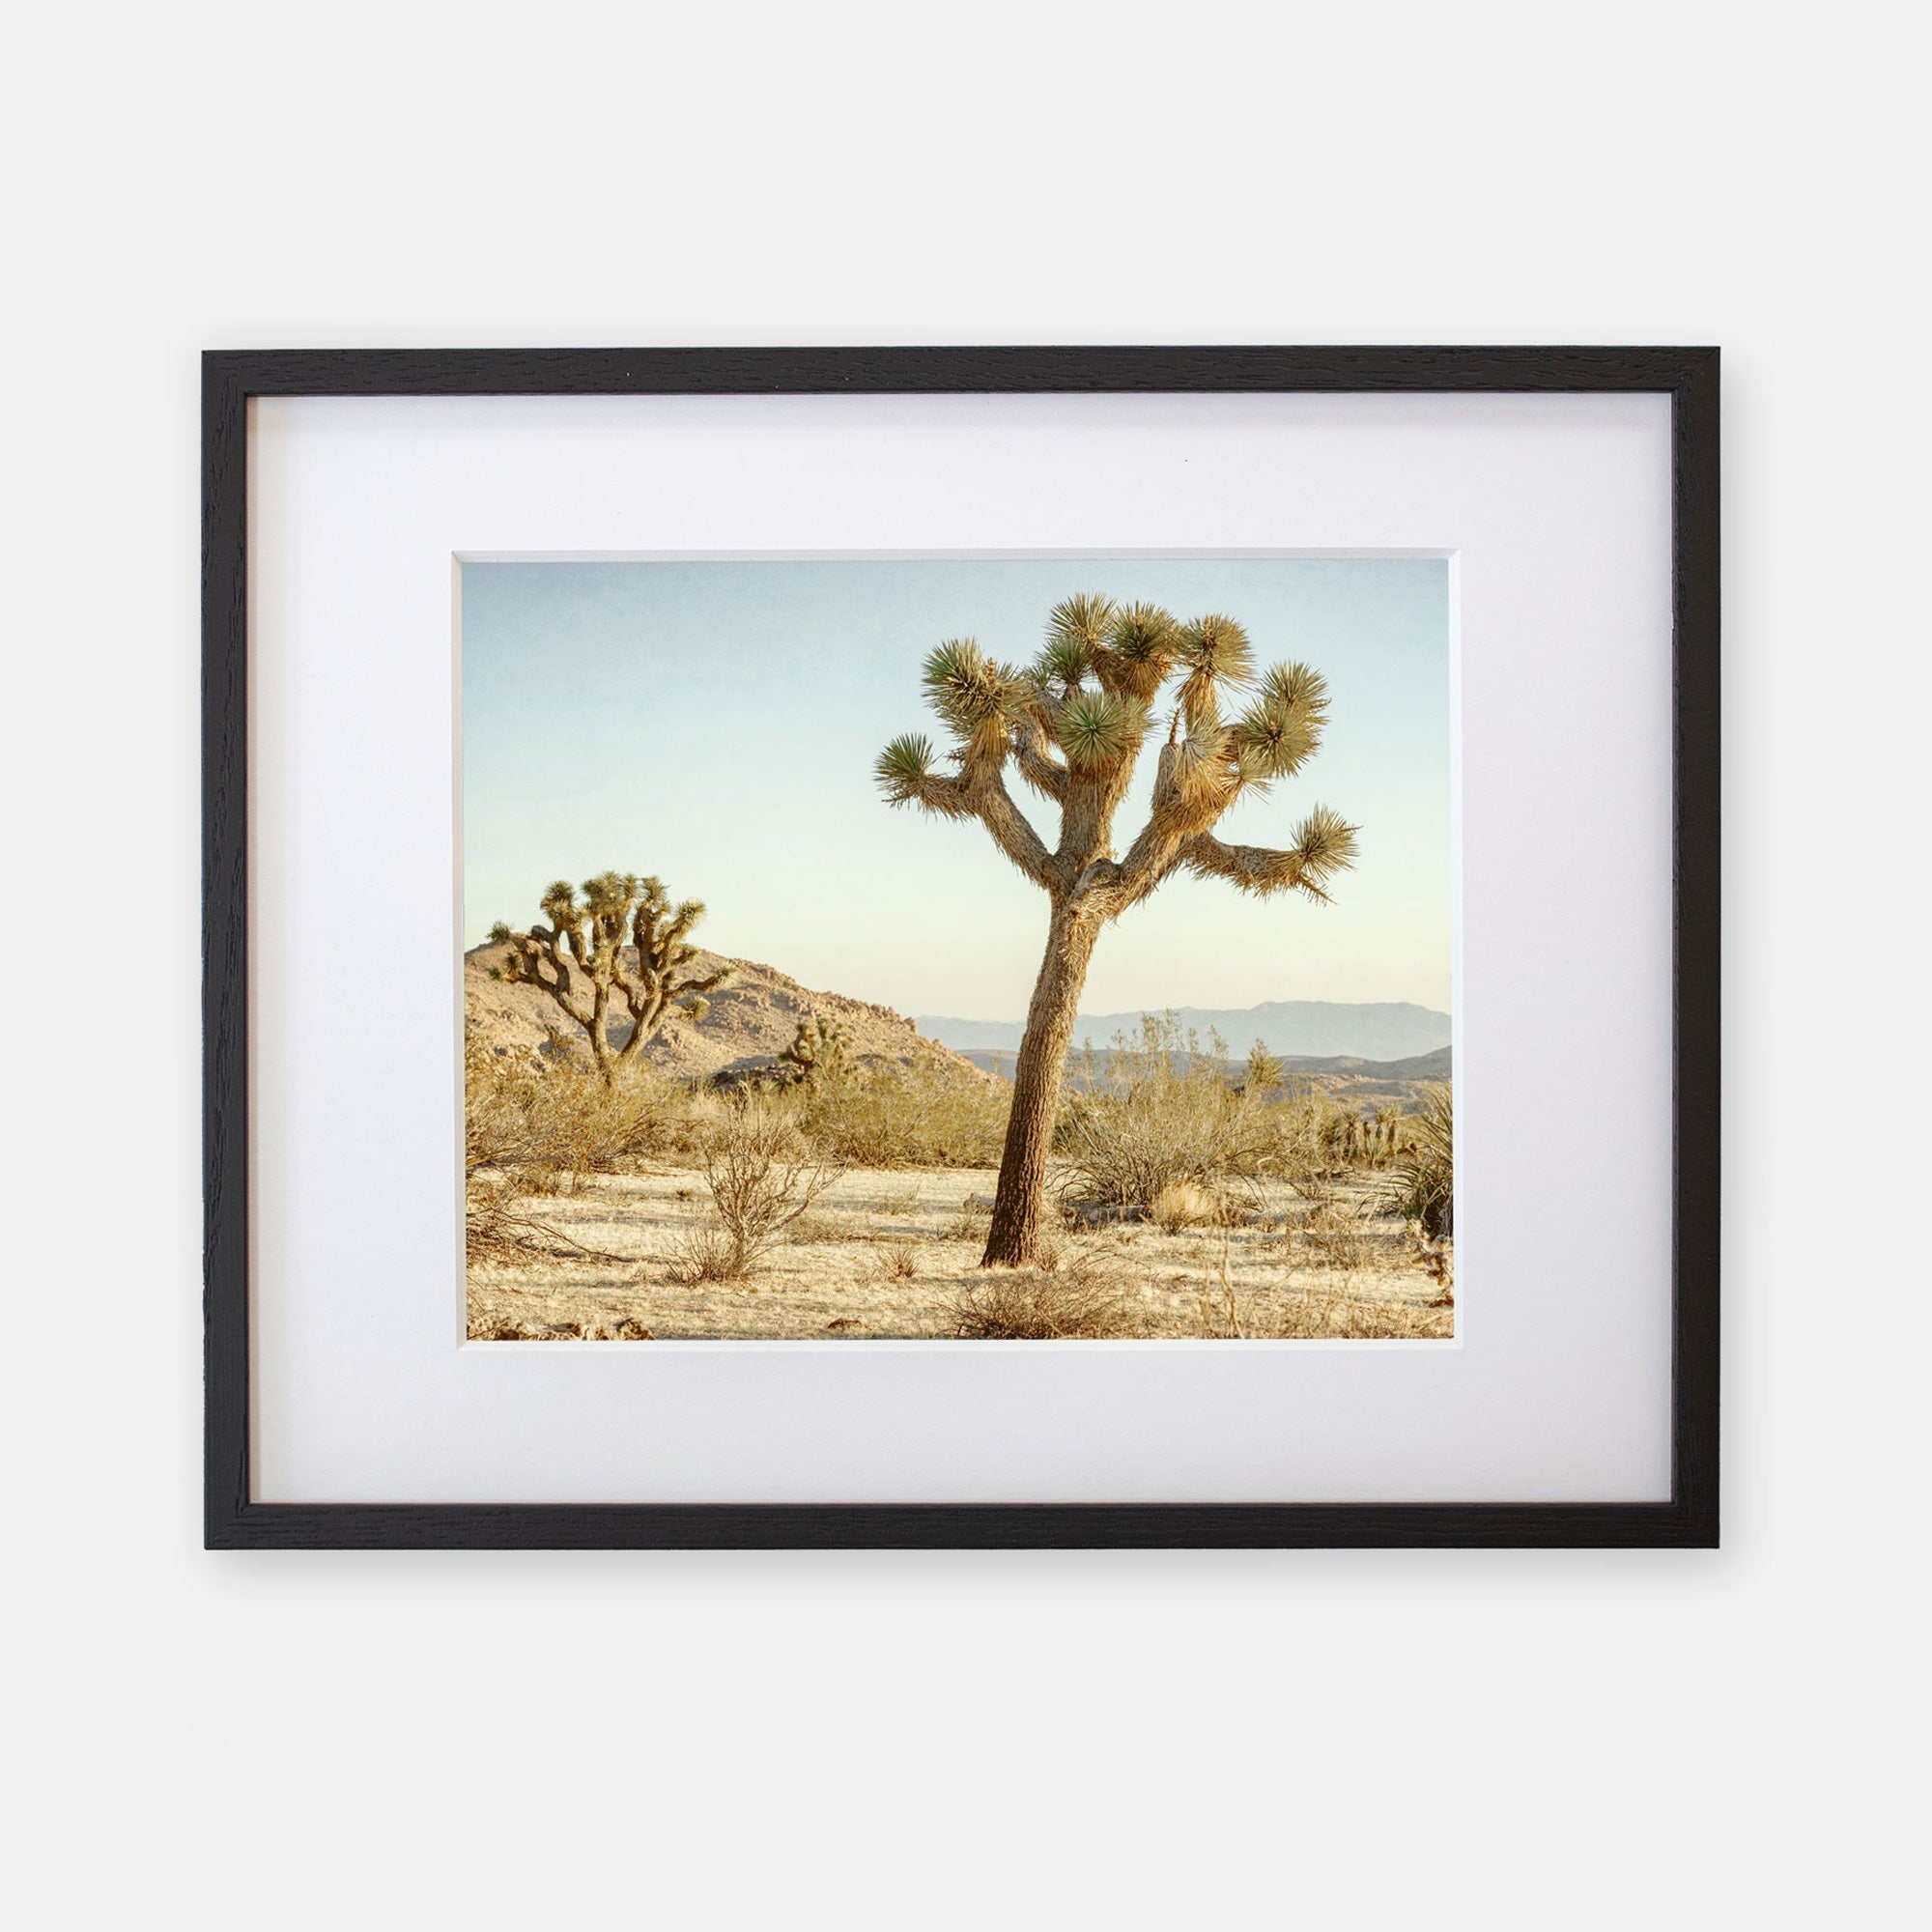 An unframed photograph of a Joshua Tree in a desert landscape with sparse vegetation and distant hills, under a clear sky, printed on archival photographic paper - Offley Green&#39;s Joshua Tree Print, &#39;Mighty Joshua&#39;.